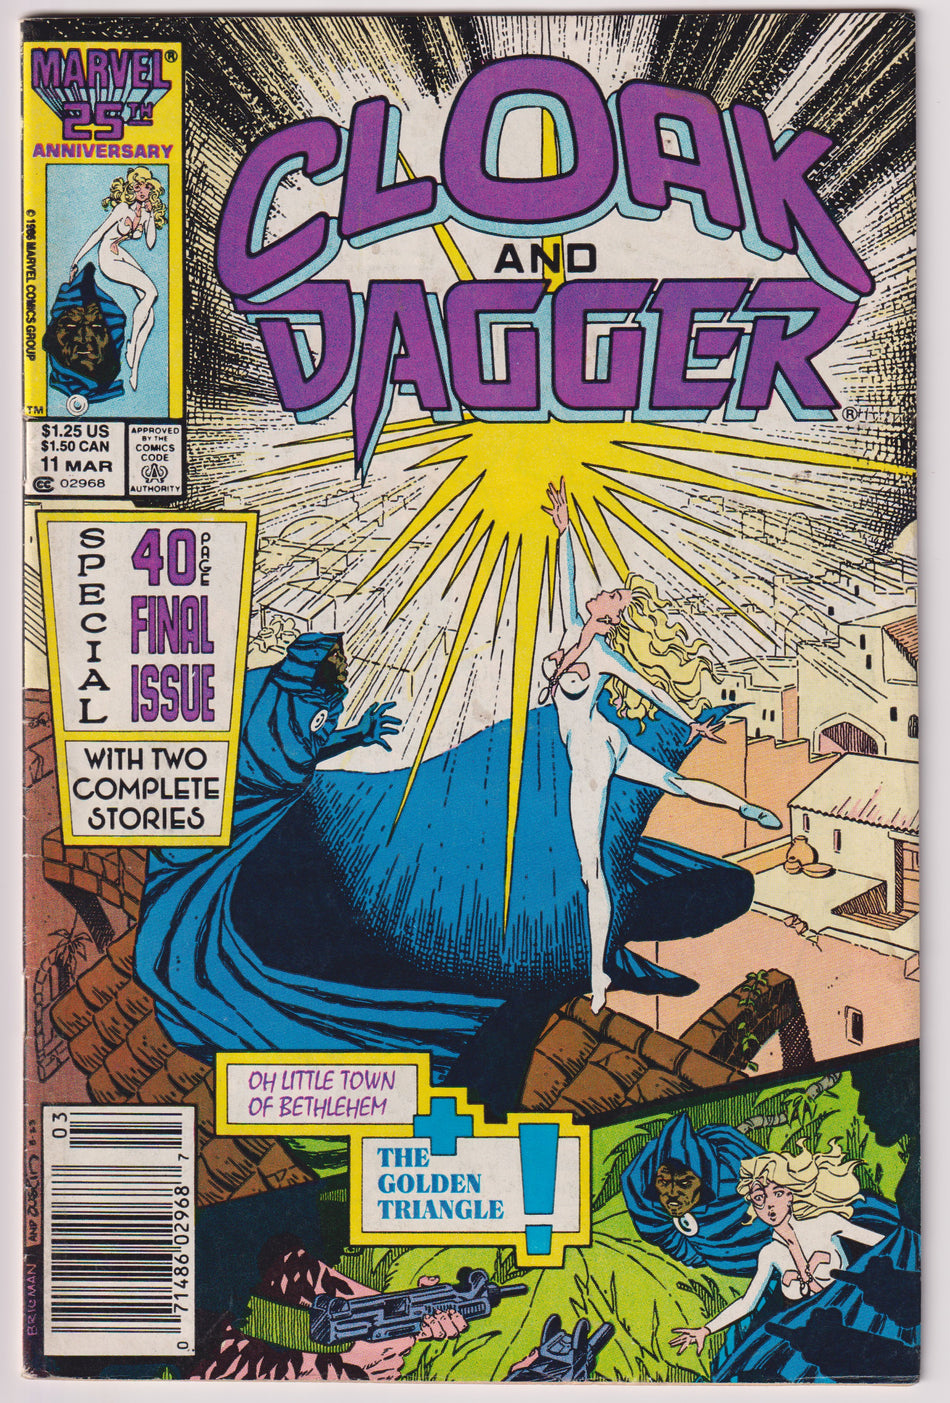 Photo of Cloak And Dagger, Vol. 2 (1987)  Iss 11   Comic sold by Stronghold Collectibles